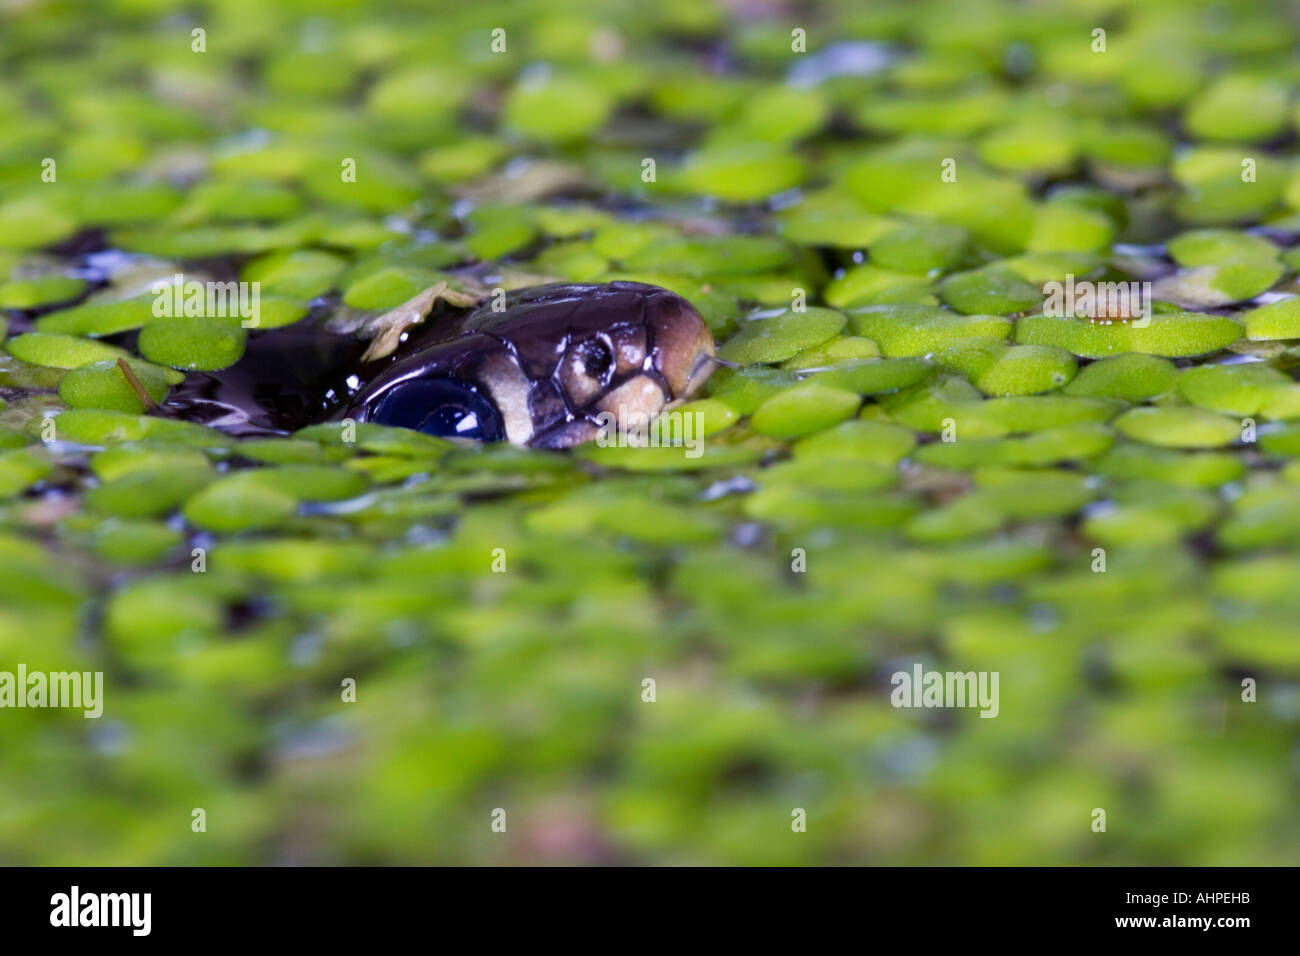 Small young Grass snake Natrix natrix swimming in garden pond with head just out of water Potton Bedfordshire Stock Photo